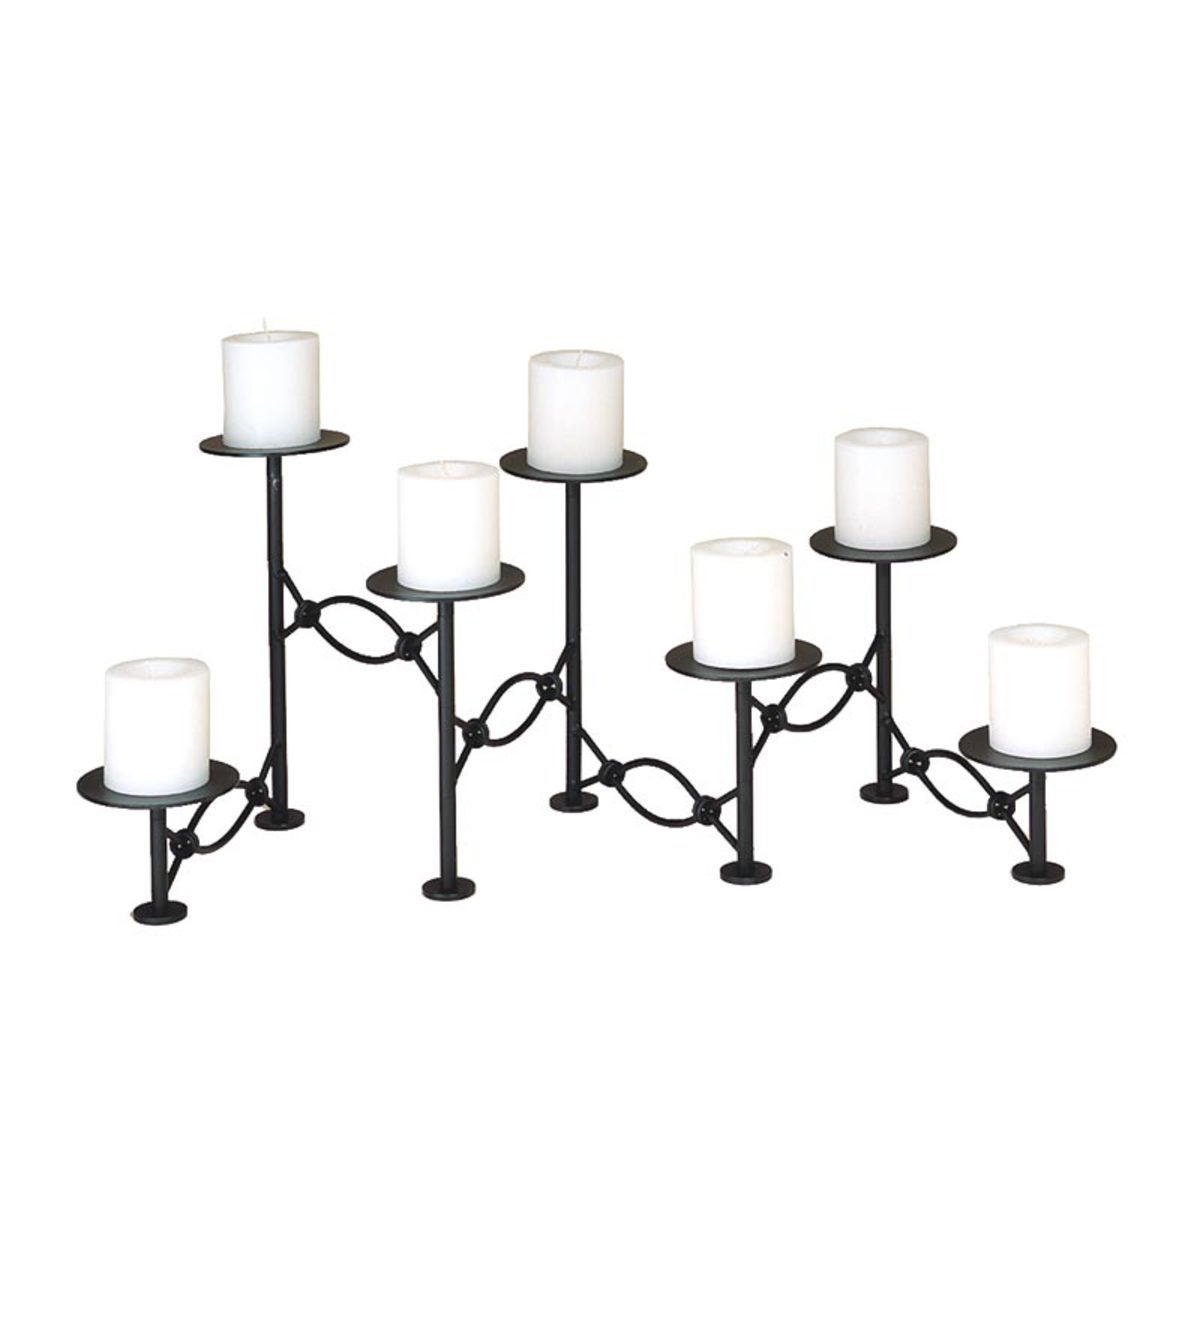 Iron Seven-Tiered Linked Fireplace Candelabra